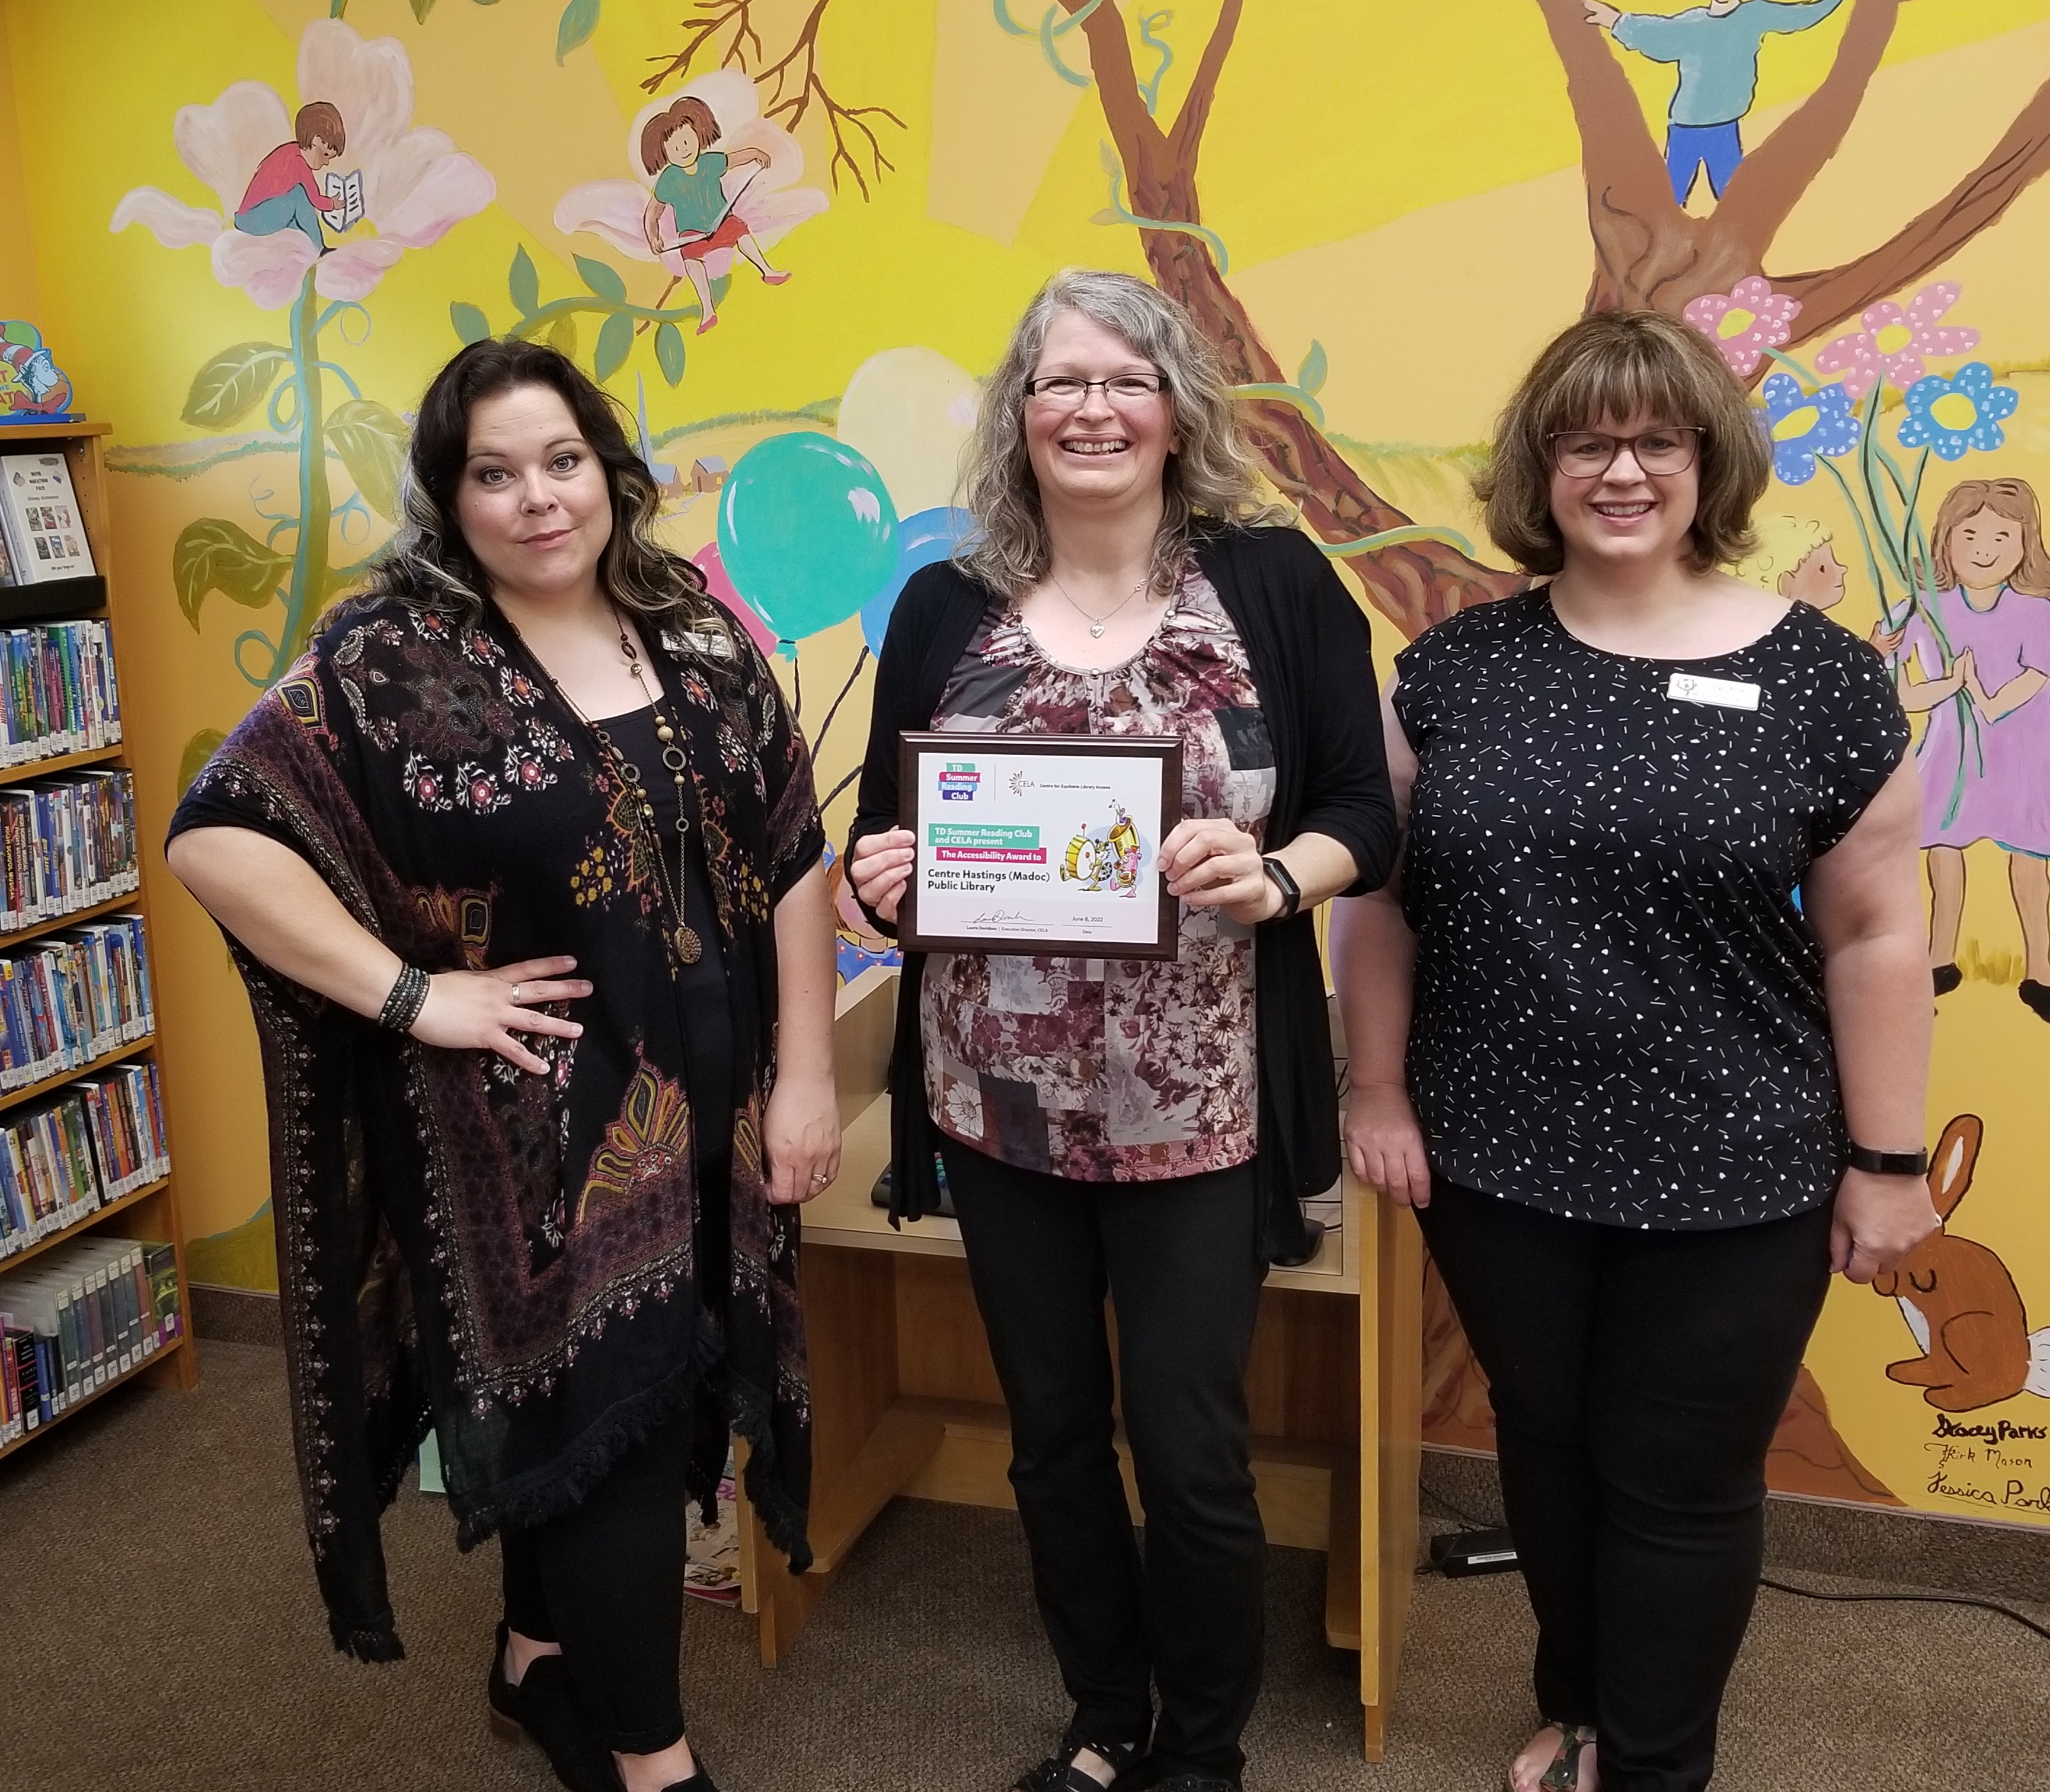 3 staff from Madoc Public Library holding TD Summer Reading Club Accessibility Award Winner plaque.